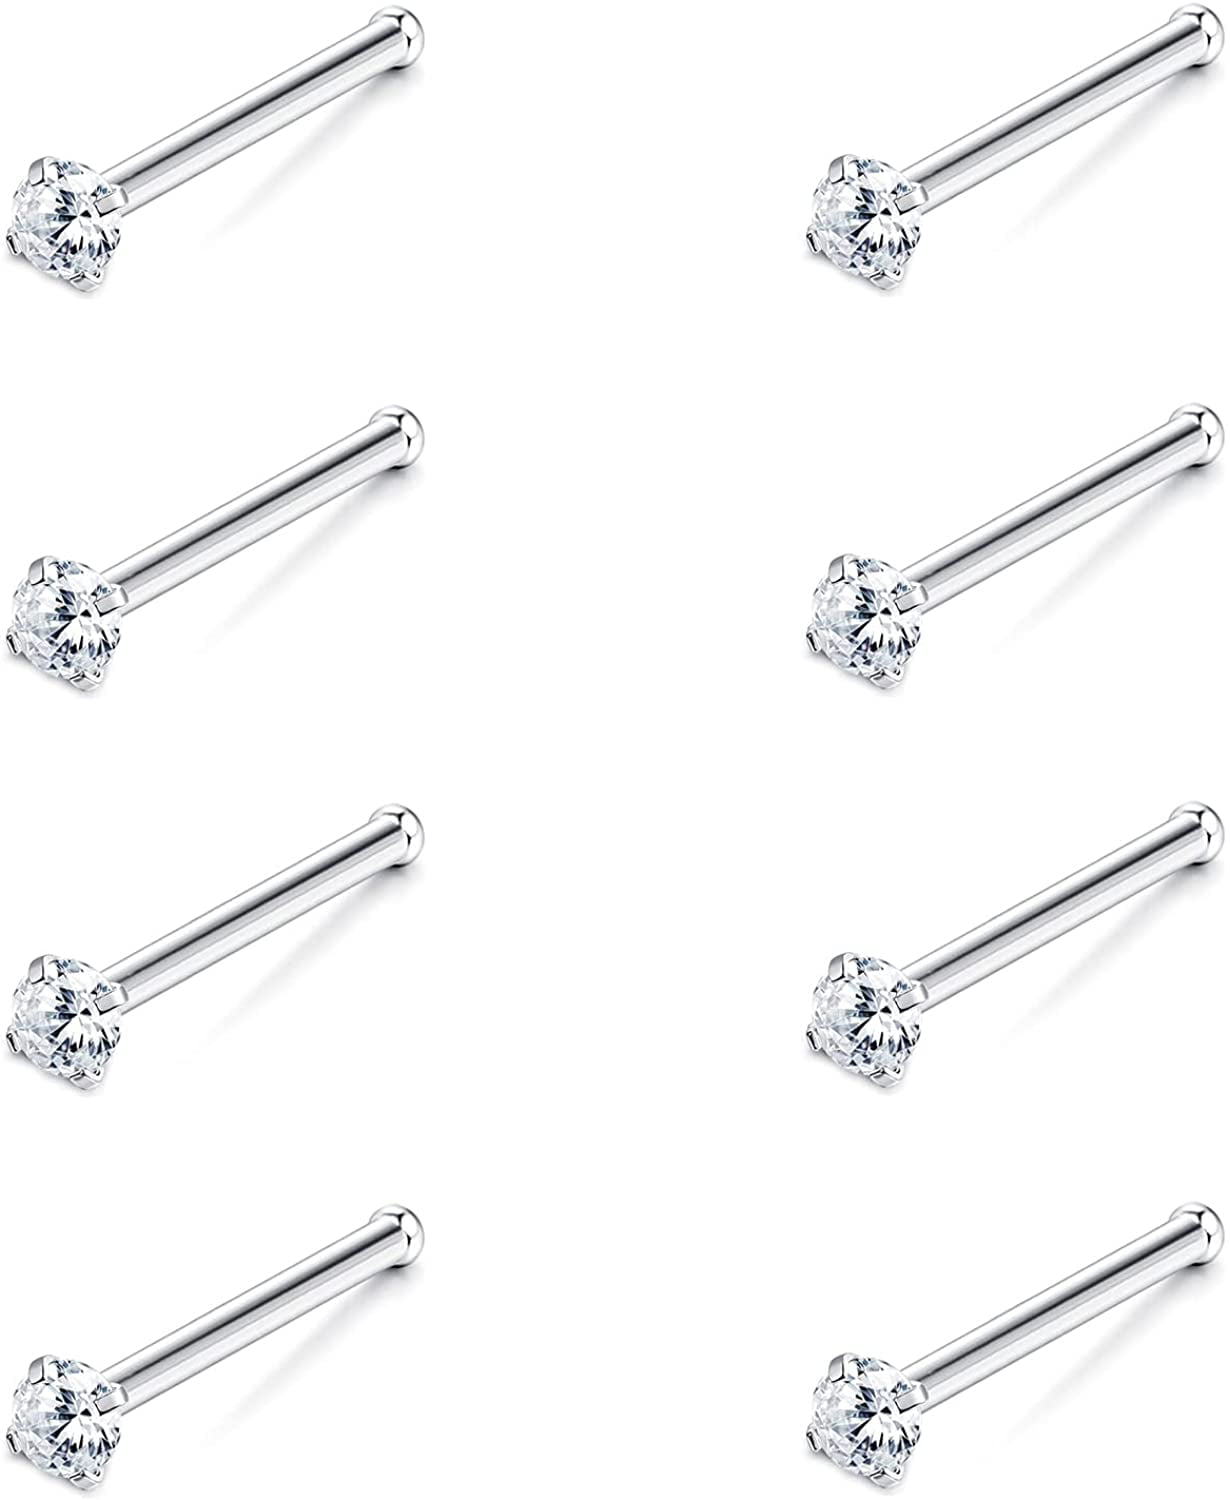 Sllaiss 8pcs 20G Nose Rings for Women Men Multicolor 5A CZ Corkscrew Nose Studs L Shaped Nose Rings Stainless Steel Nose Piercing Jewelry 